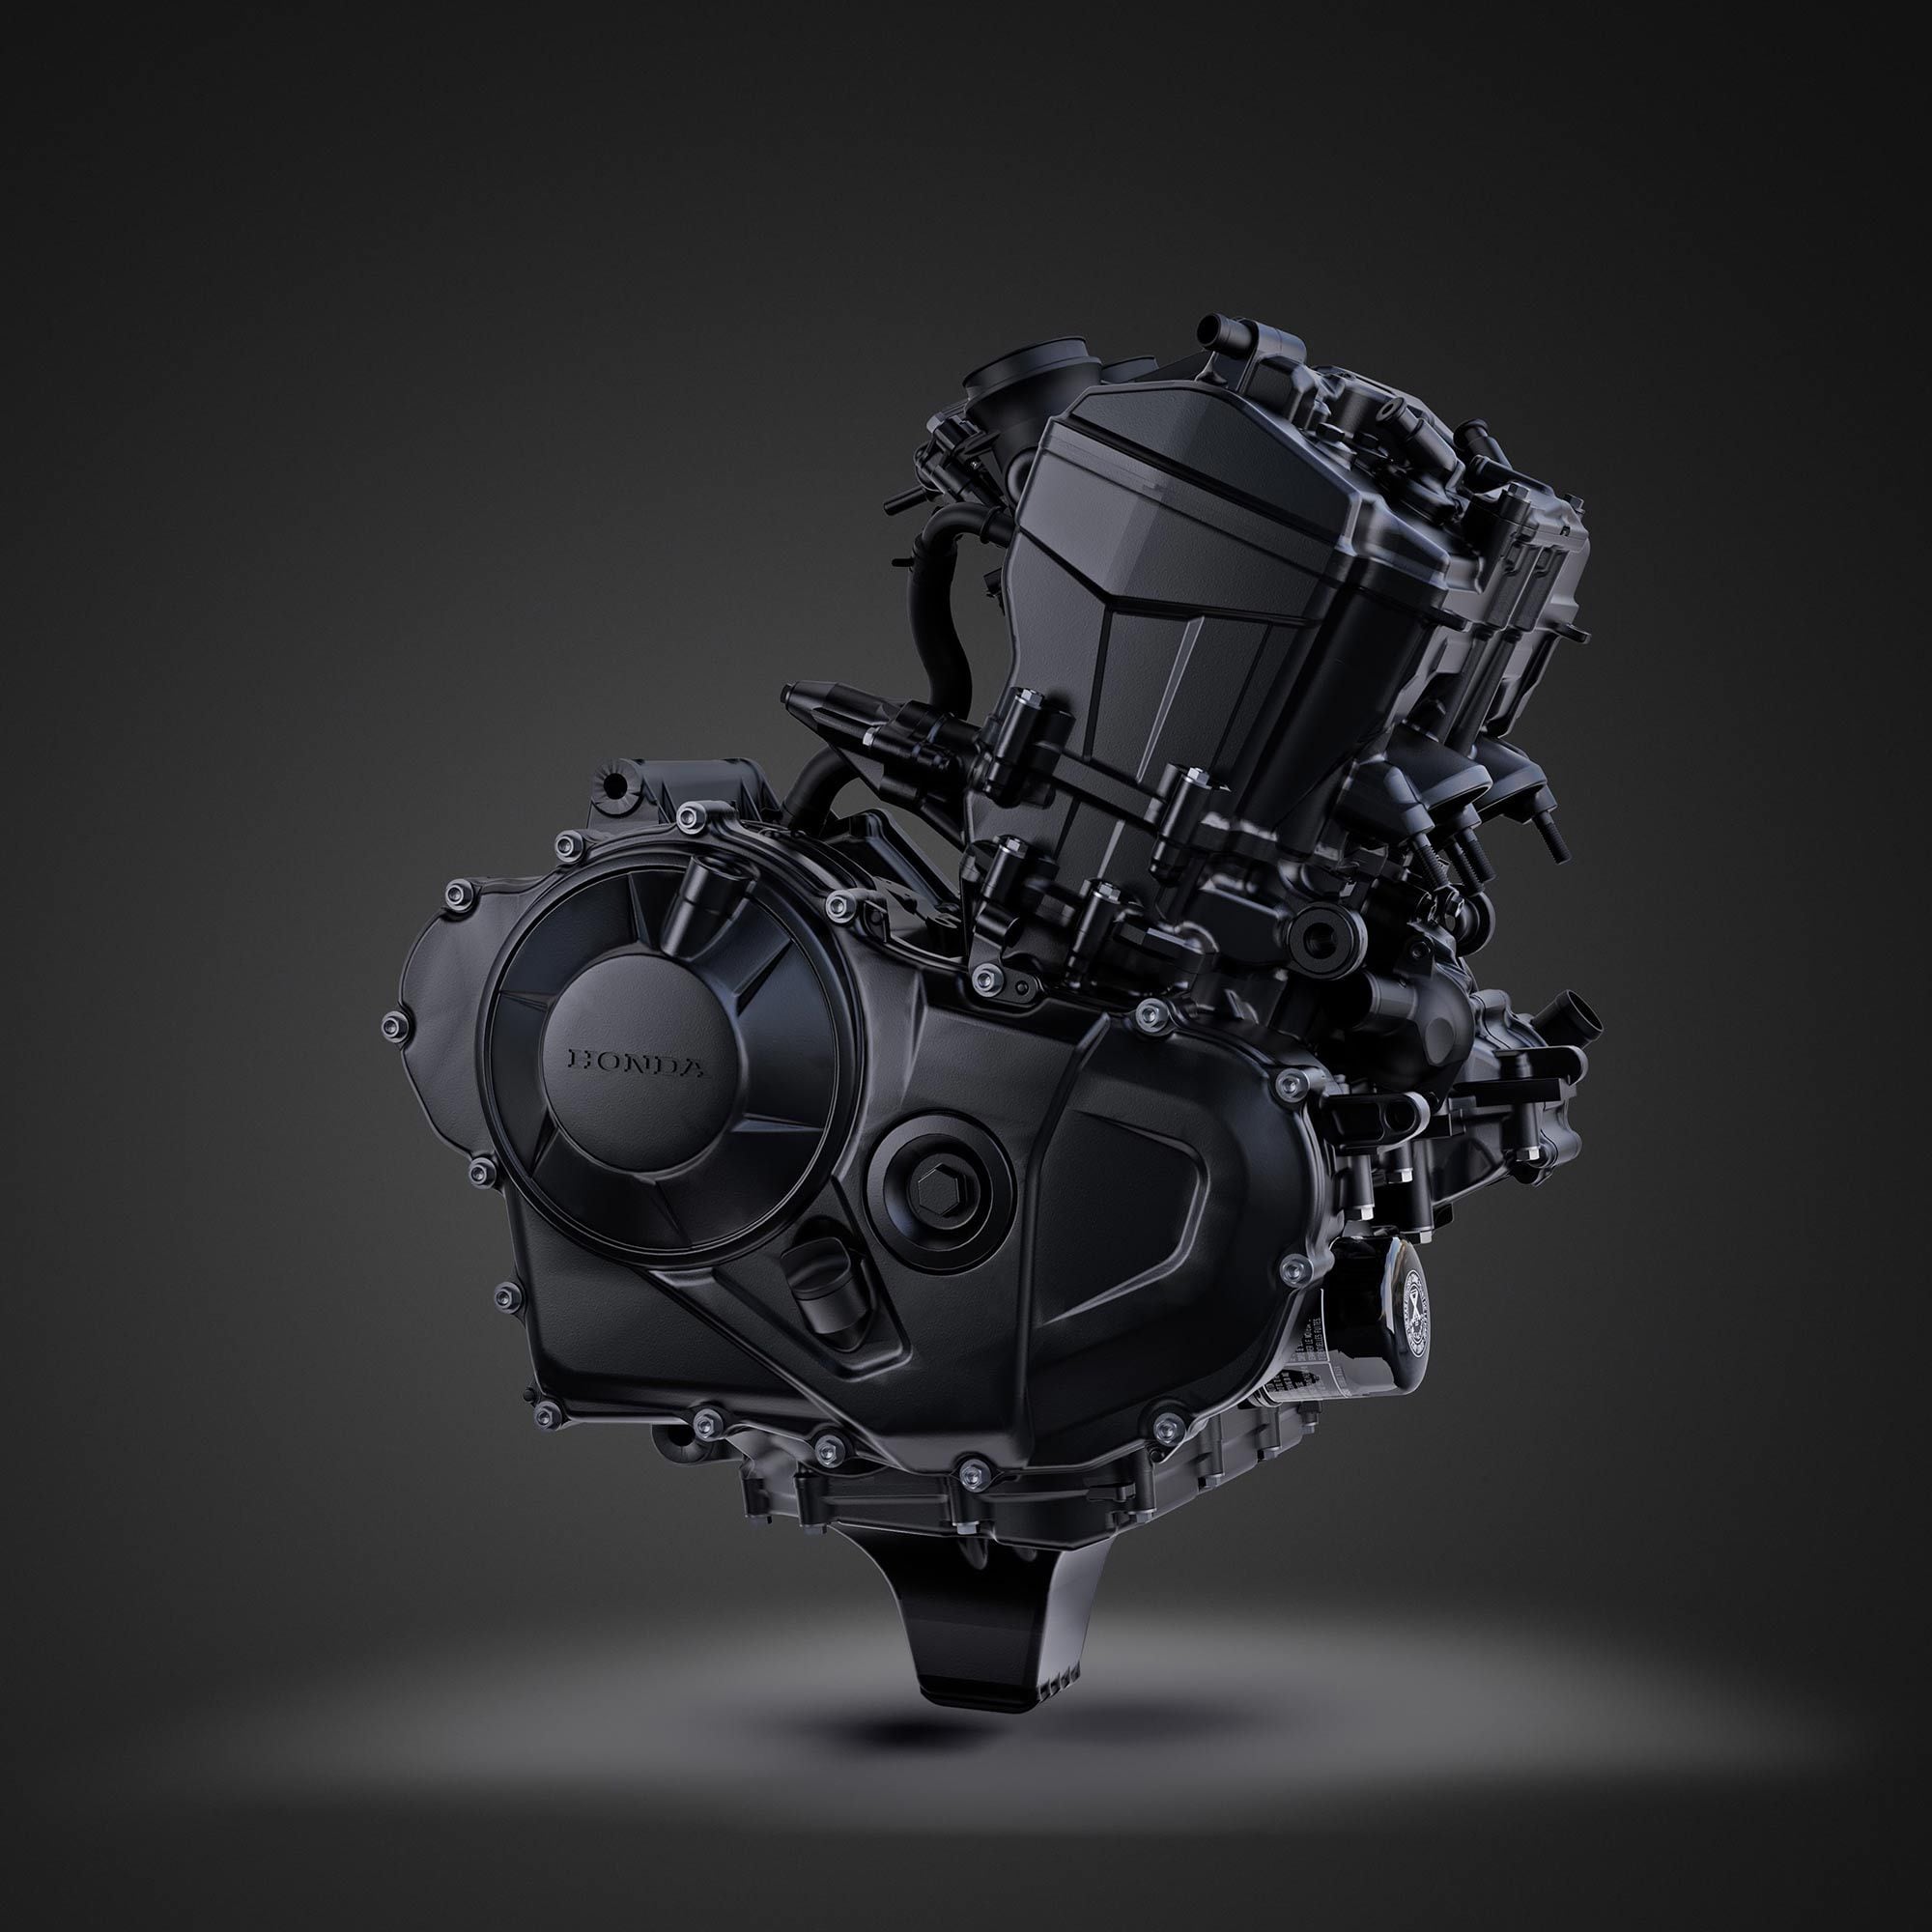 The Unicam V8 engine will feature a 270-degree crankshaft and is capable of producing just over 90 horsepower at 9,500 rpm and 55 lb.-ft.  of torque at 7,250 rpm.